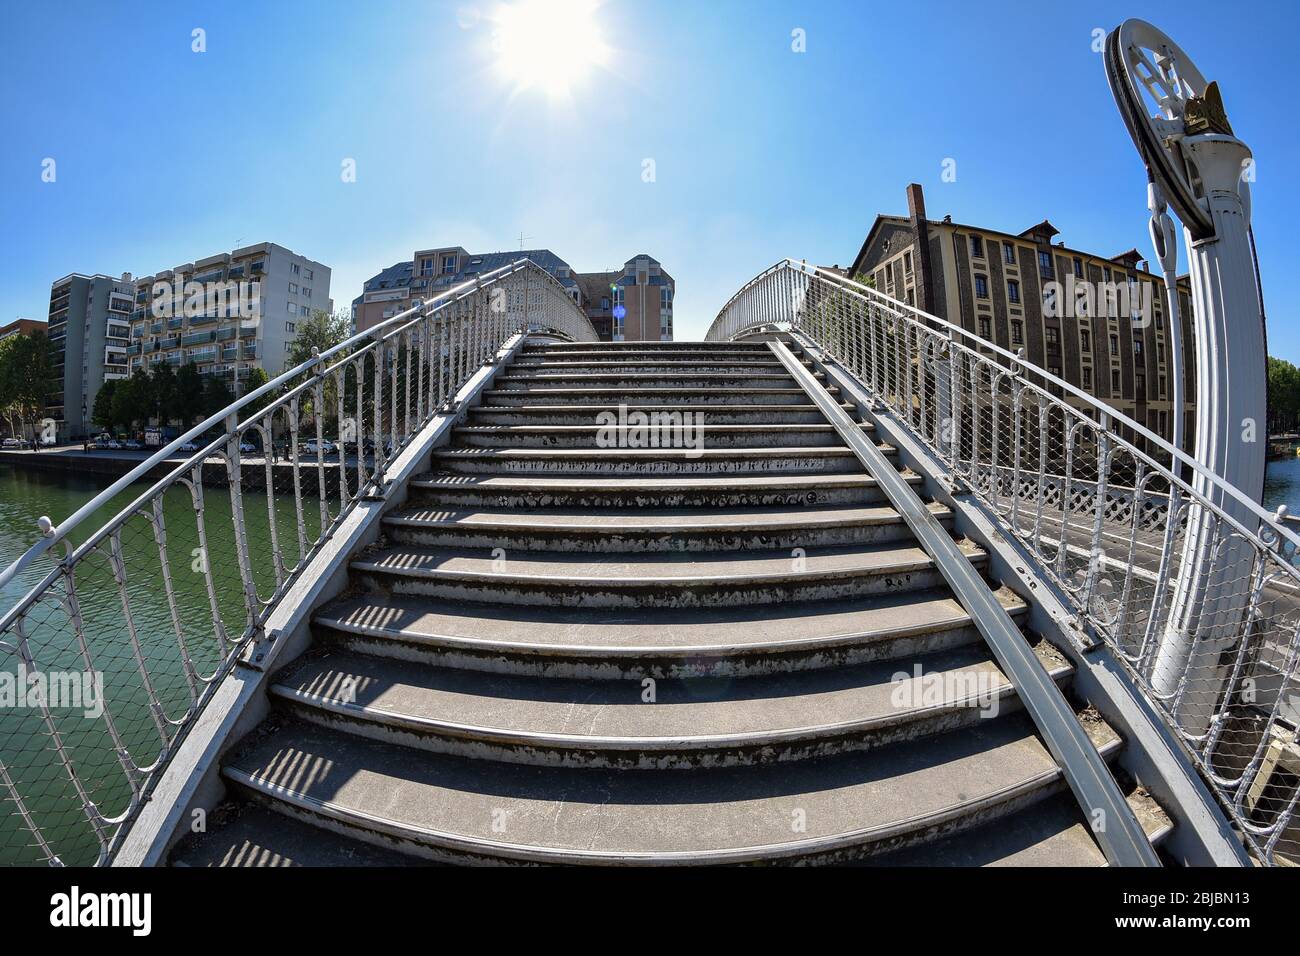 Stairs of the Rue de Crimée lifting bridge (1885) over the Canal de l'Ourcq in the 19th arrondissement of Paris, picture taken with a wide-angle lens. Stock Photo